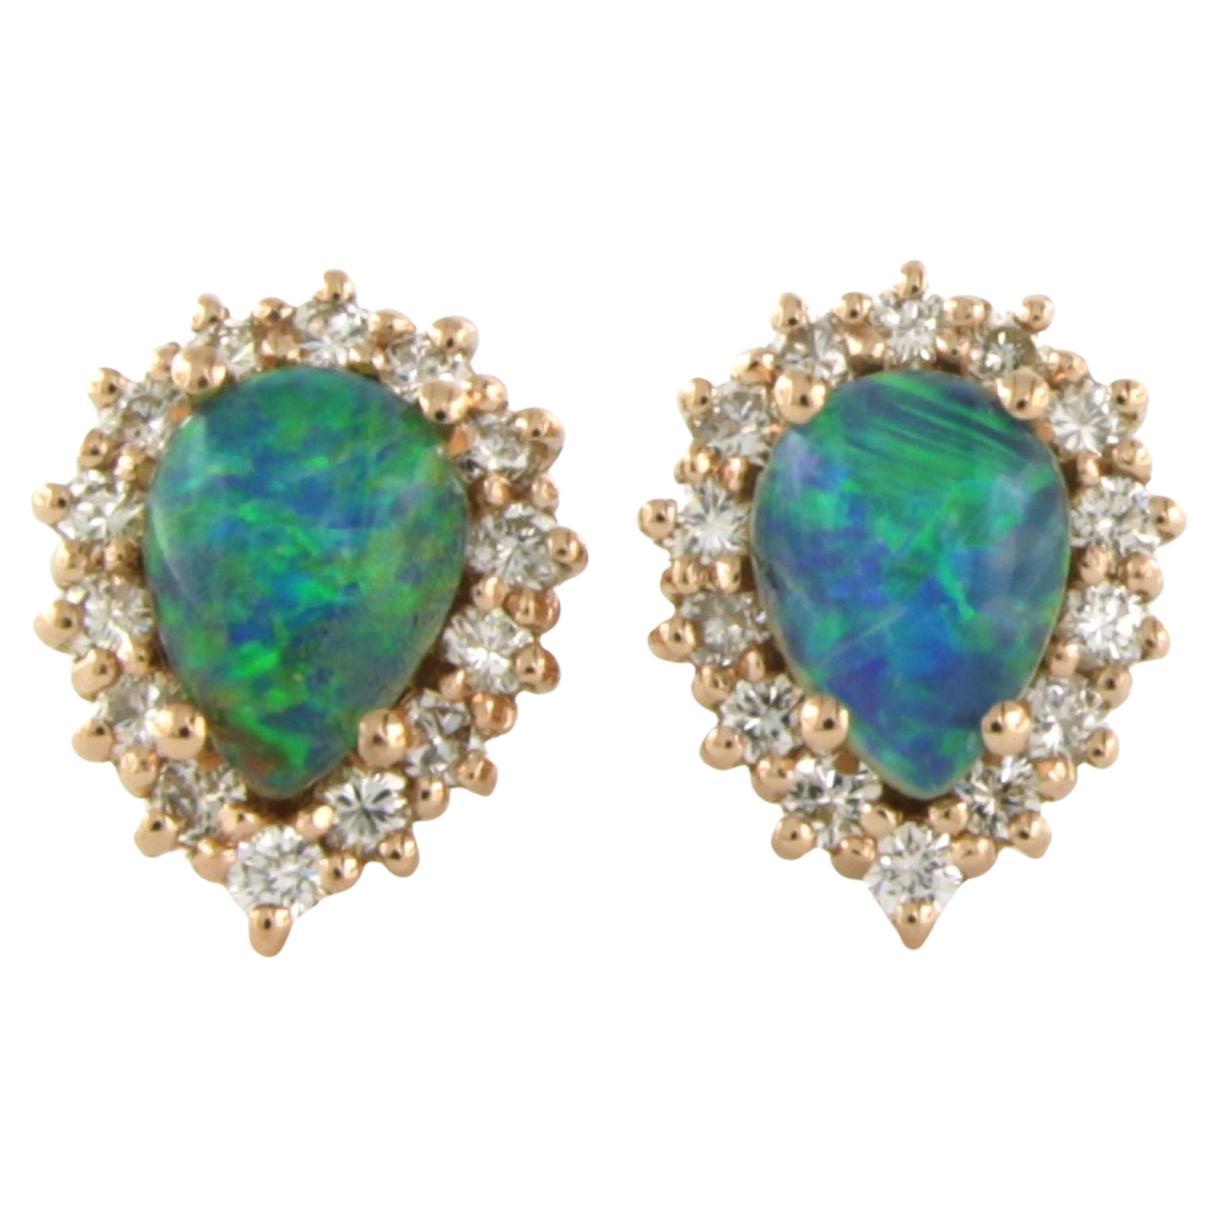 Earrings et with opal and diamonds 18k pink gold